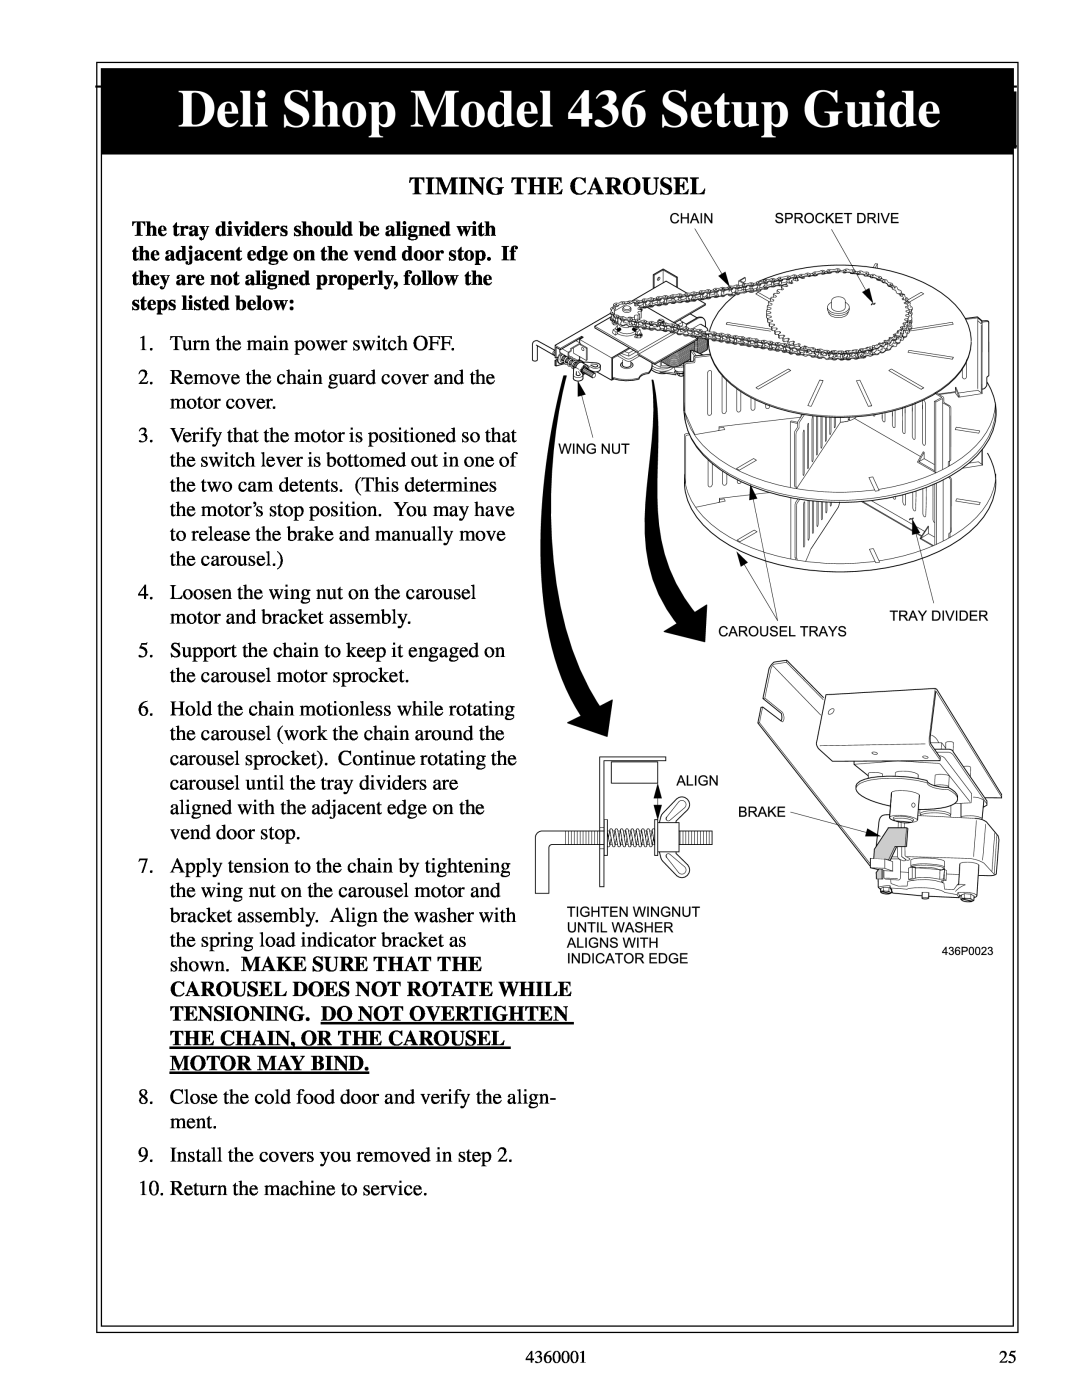 Crane Merchandising Systems 436 manual Timing The Carousel, Carousel Does Not Rotate While Tensioning. Do Not Overtighten 